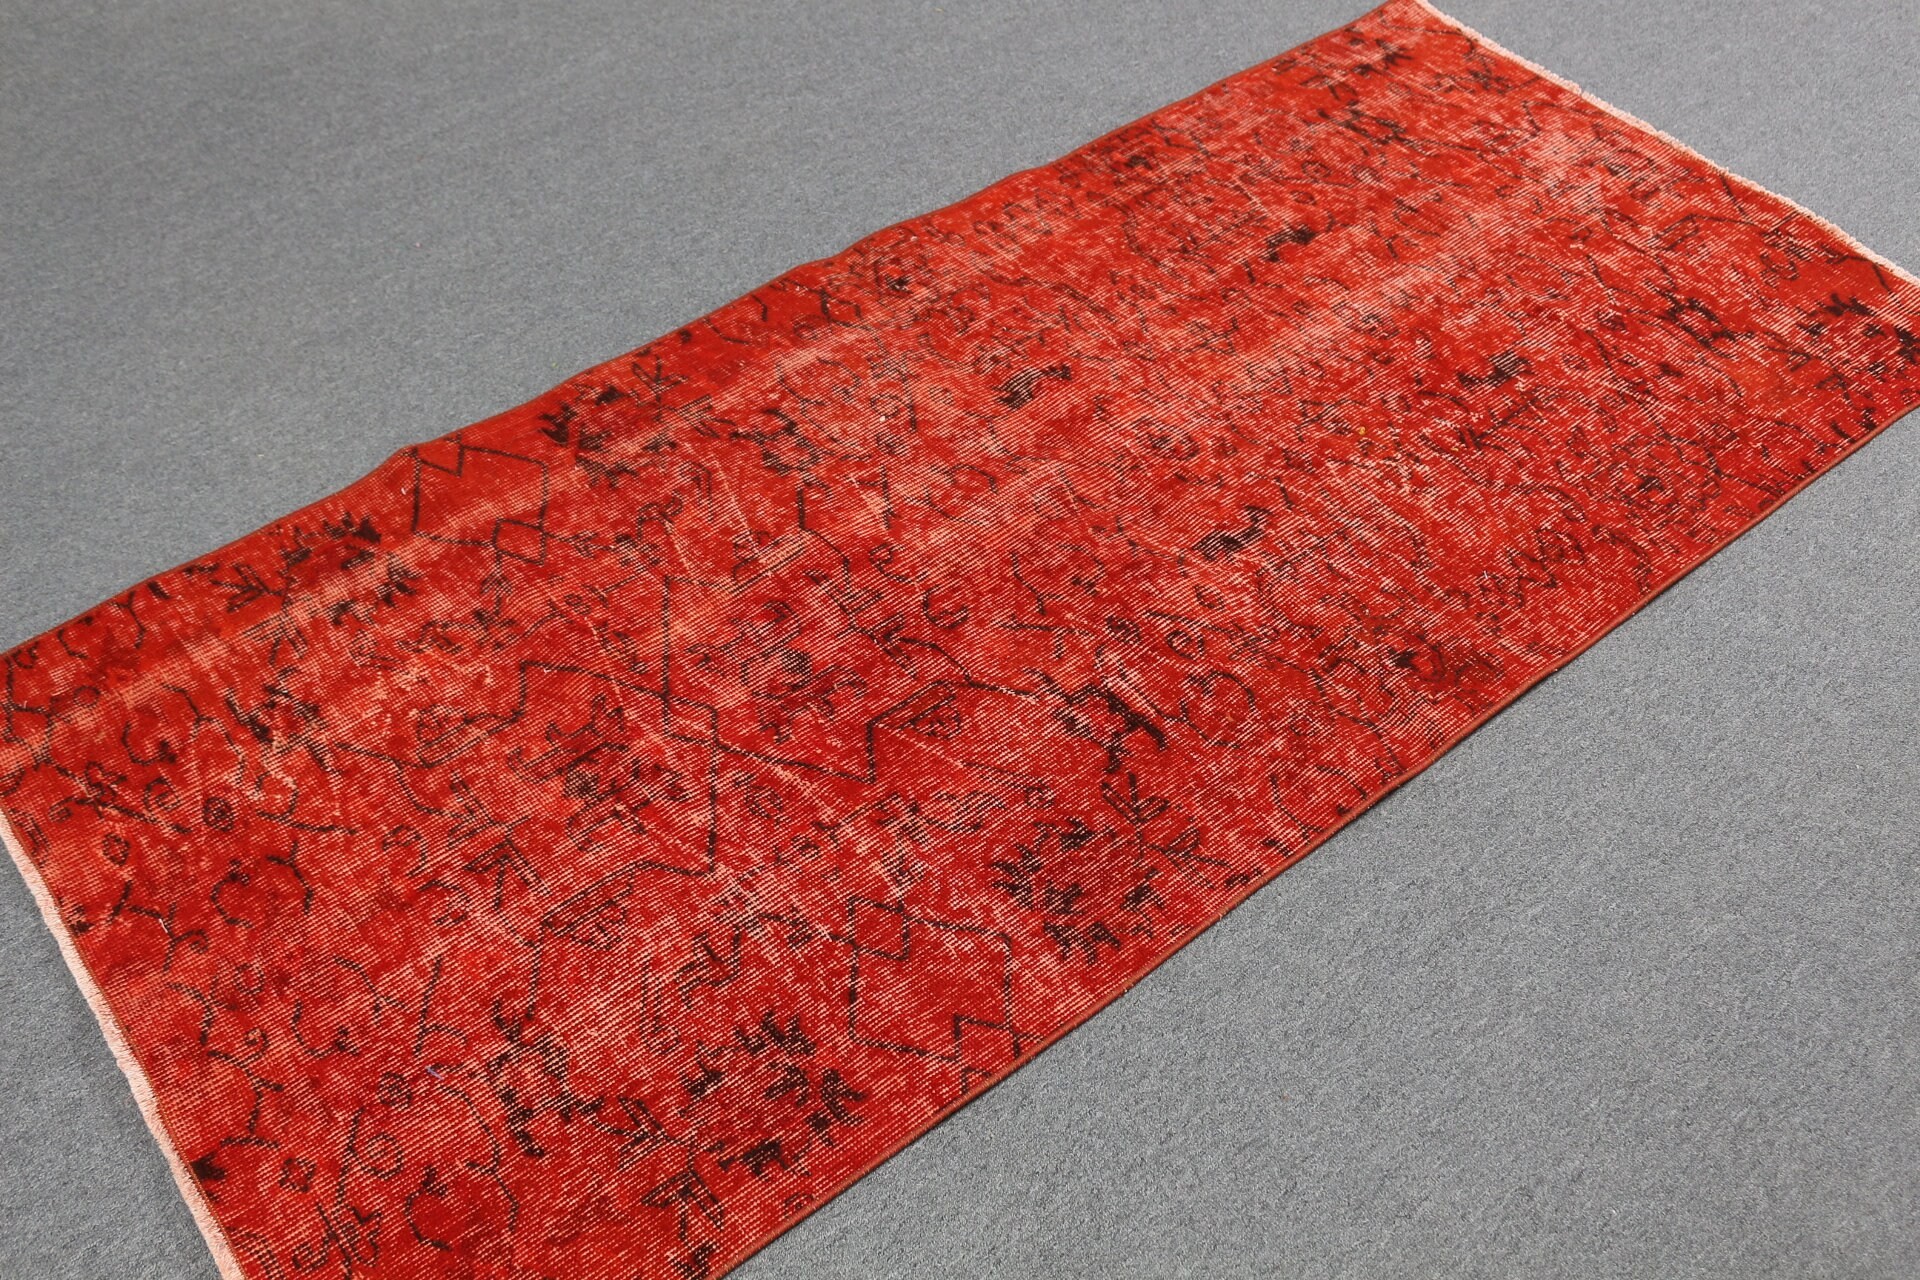 Turkish Rugs, Kitchen Rug, 3x6.5 ft Accent Rug, Home Decor Rug, Vintage Rugs, Wool Rug, Red Cool Rug, Rugs for Kitchen, Nursery Rug